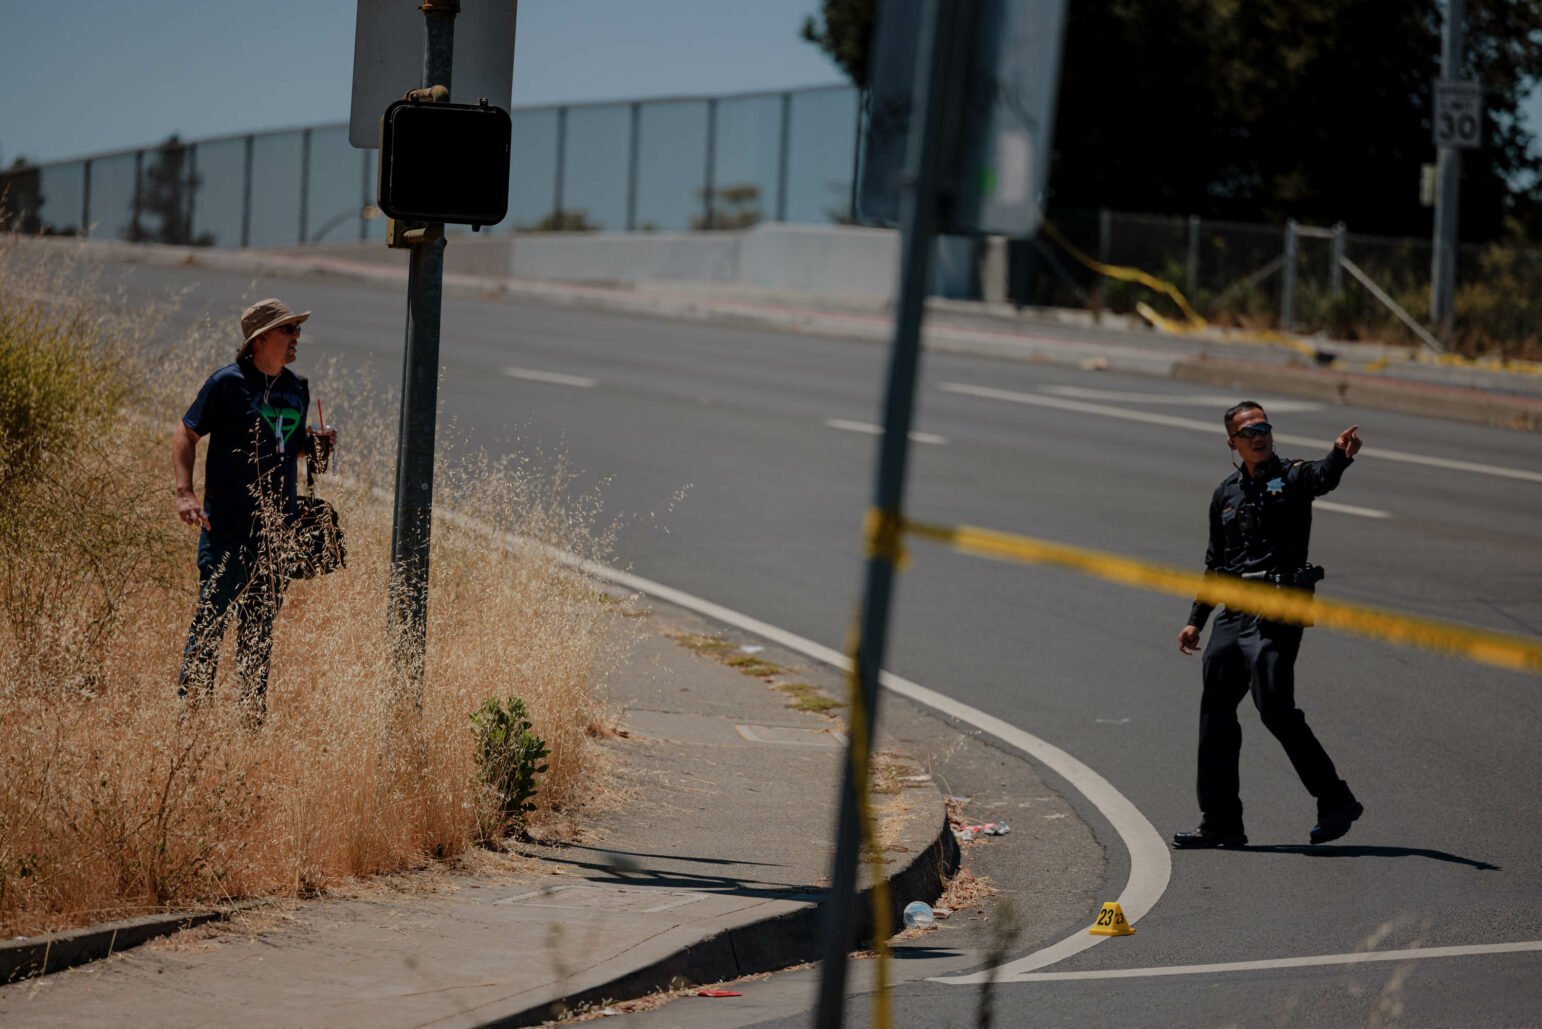 A police officer directs pedestrian traffic at a crime scene. A person with a hat stands nearby on the sidewalk. Yellow police tape and evidence markers are visible, indicating an ongoing investigation.